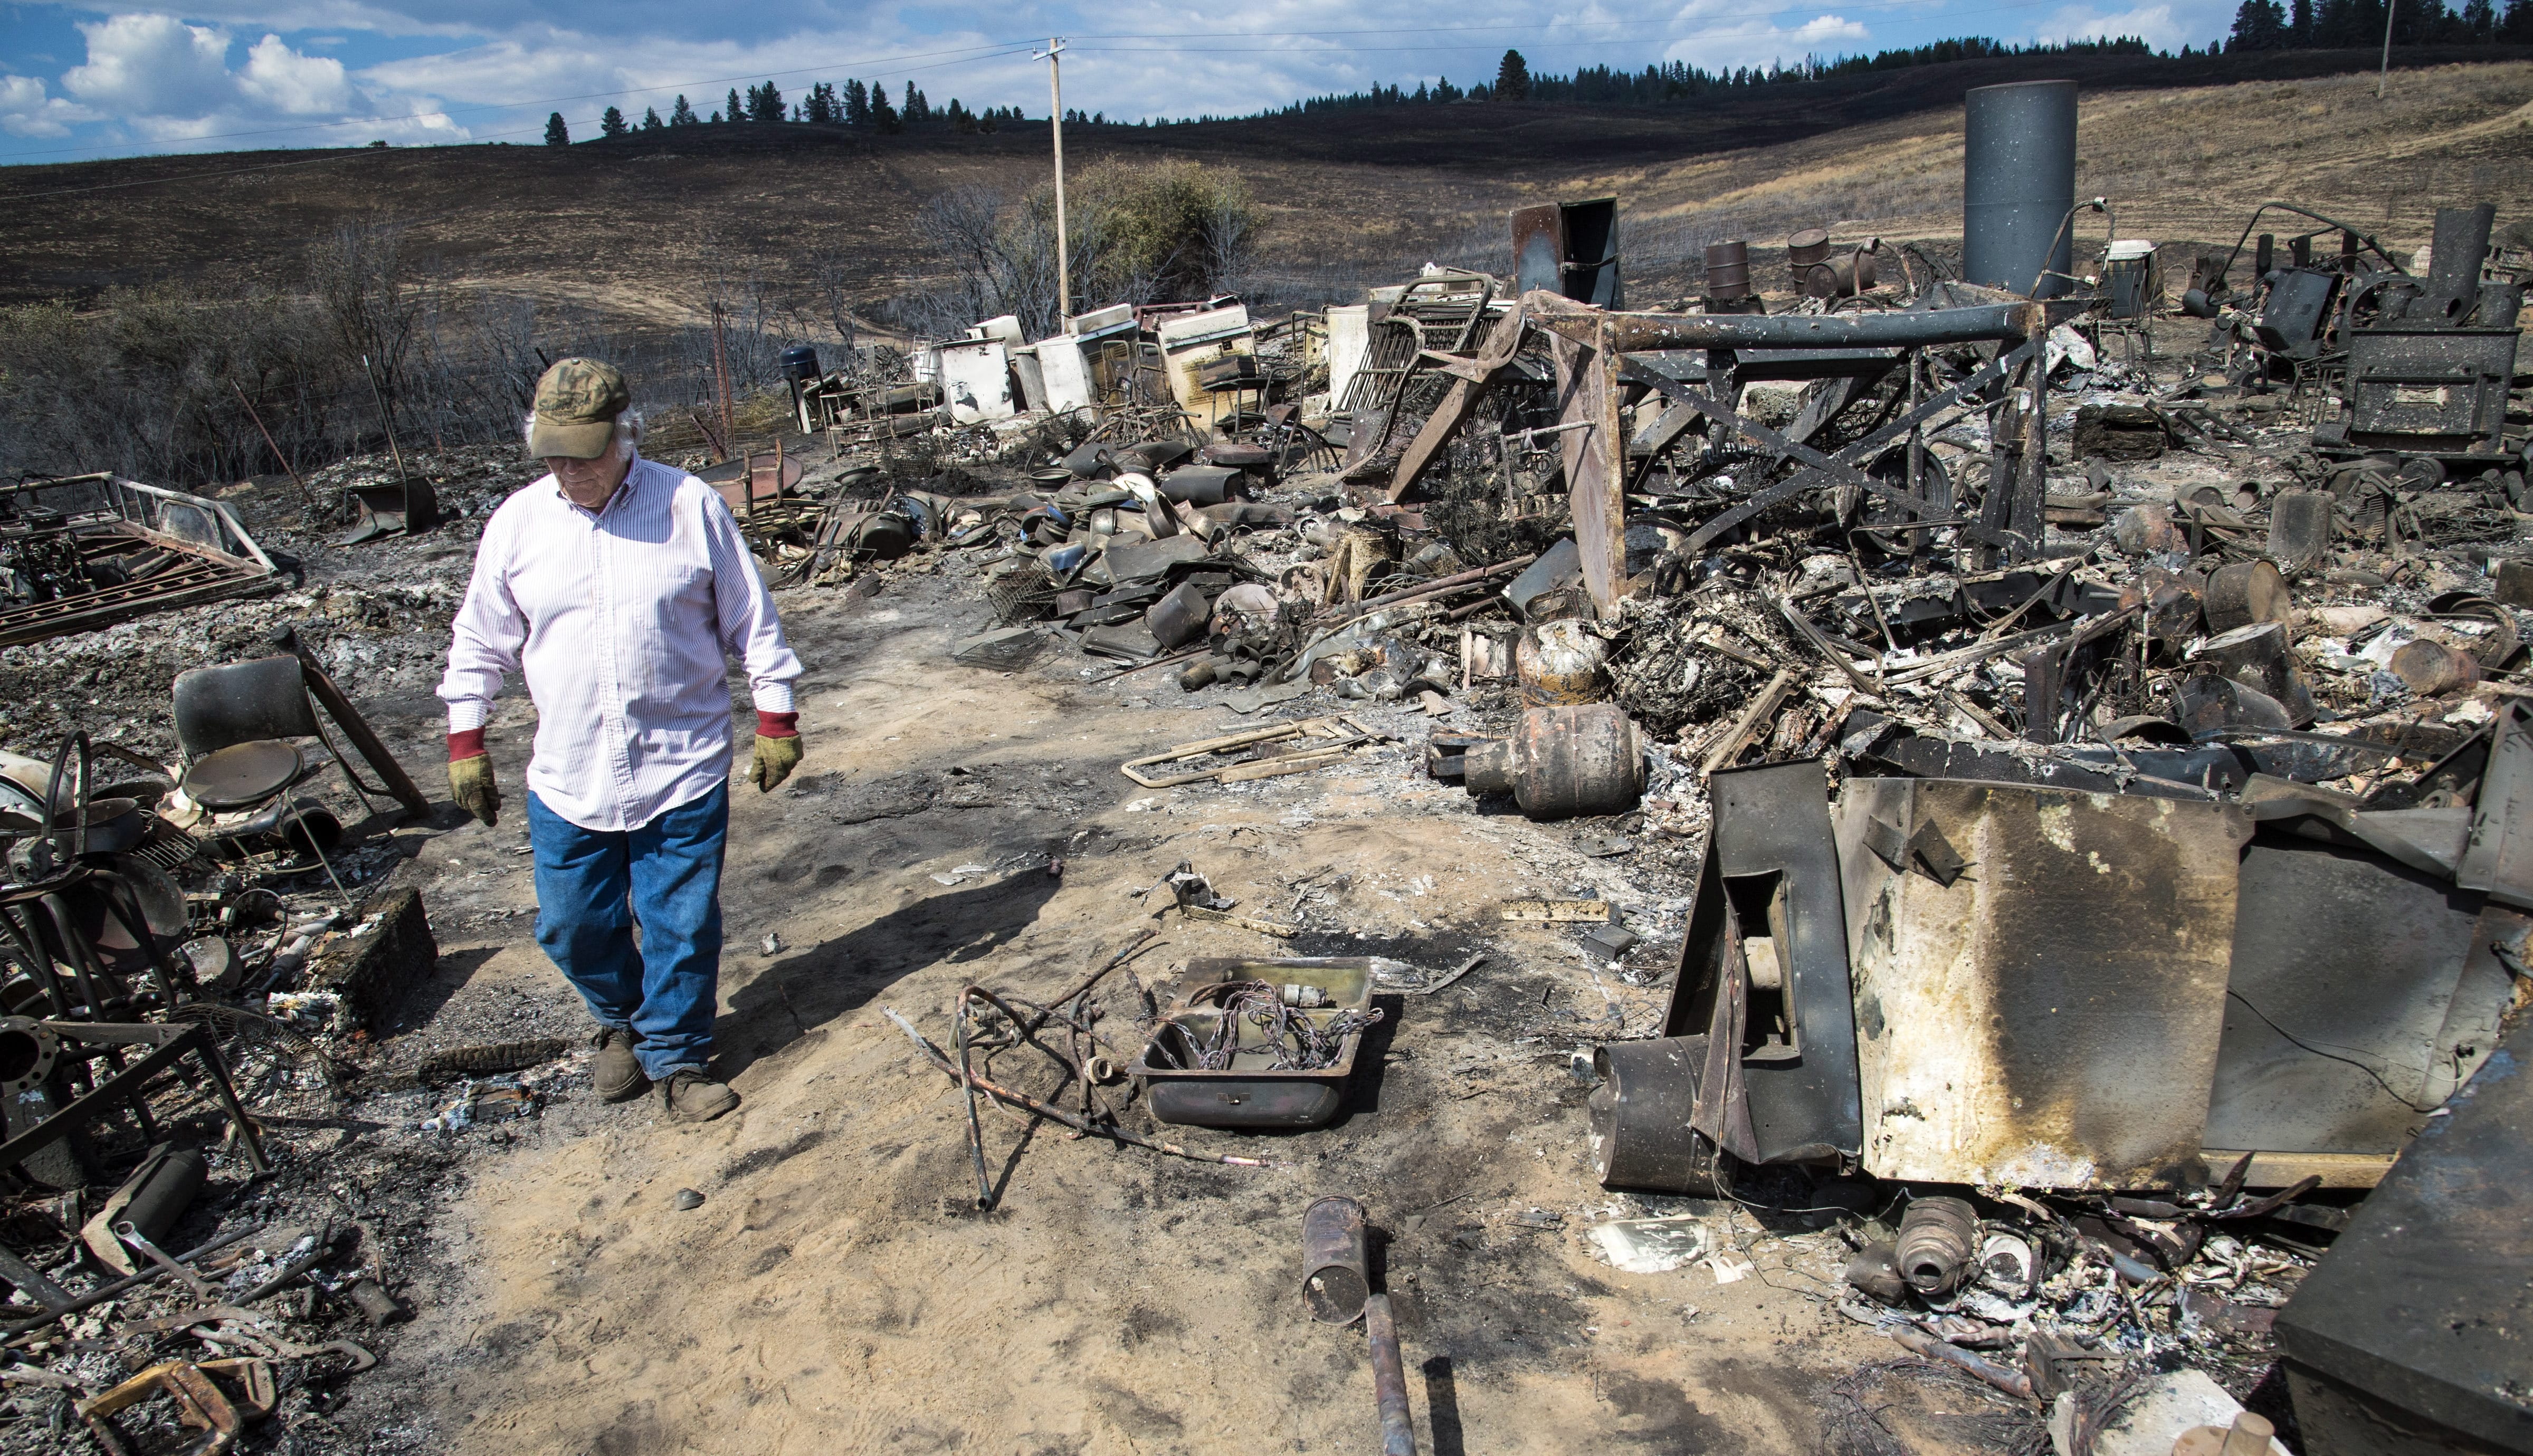 FILE -- In this Aug. 25, 2016, file photo, Vern Scherrer, 83, walks through the burned remains of his rental property near Wellpinit, Wash. After two consecutive years in which wildfires set acreage records in Washington state, this fire season has been very light. In fact, wildfires were smaller and less destructive in Washington, Oregon and Idaho this year, thanks to a heavy winter snowpack and some rain in the spring and summer months.